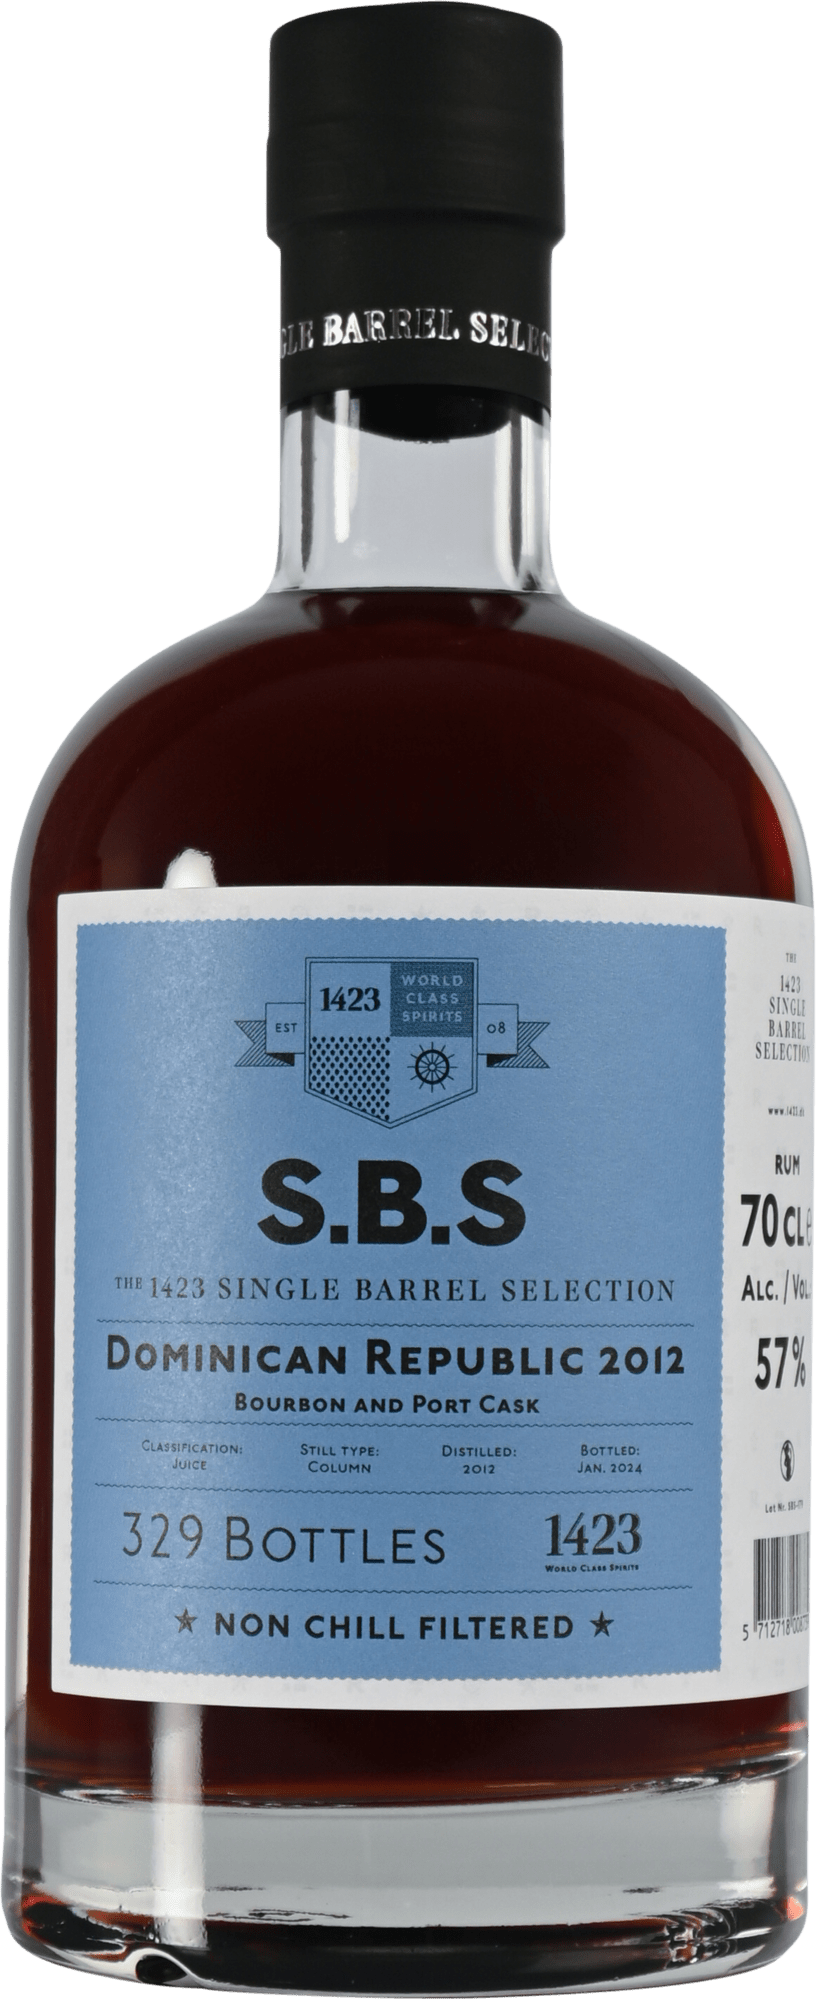 S.B.S Dominican Republic 2012 AFD, GIFT